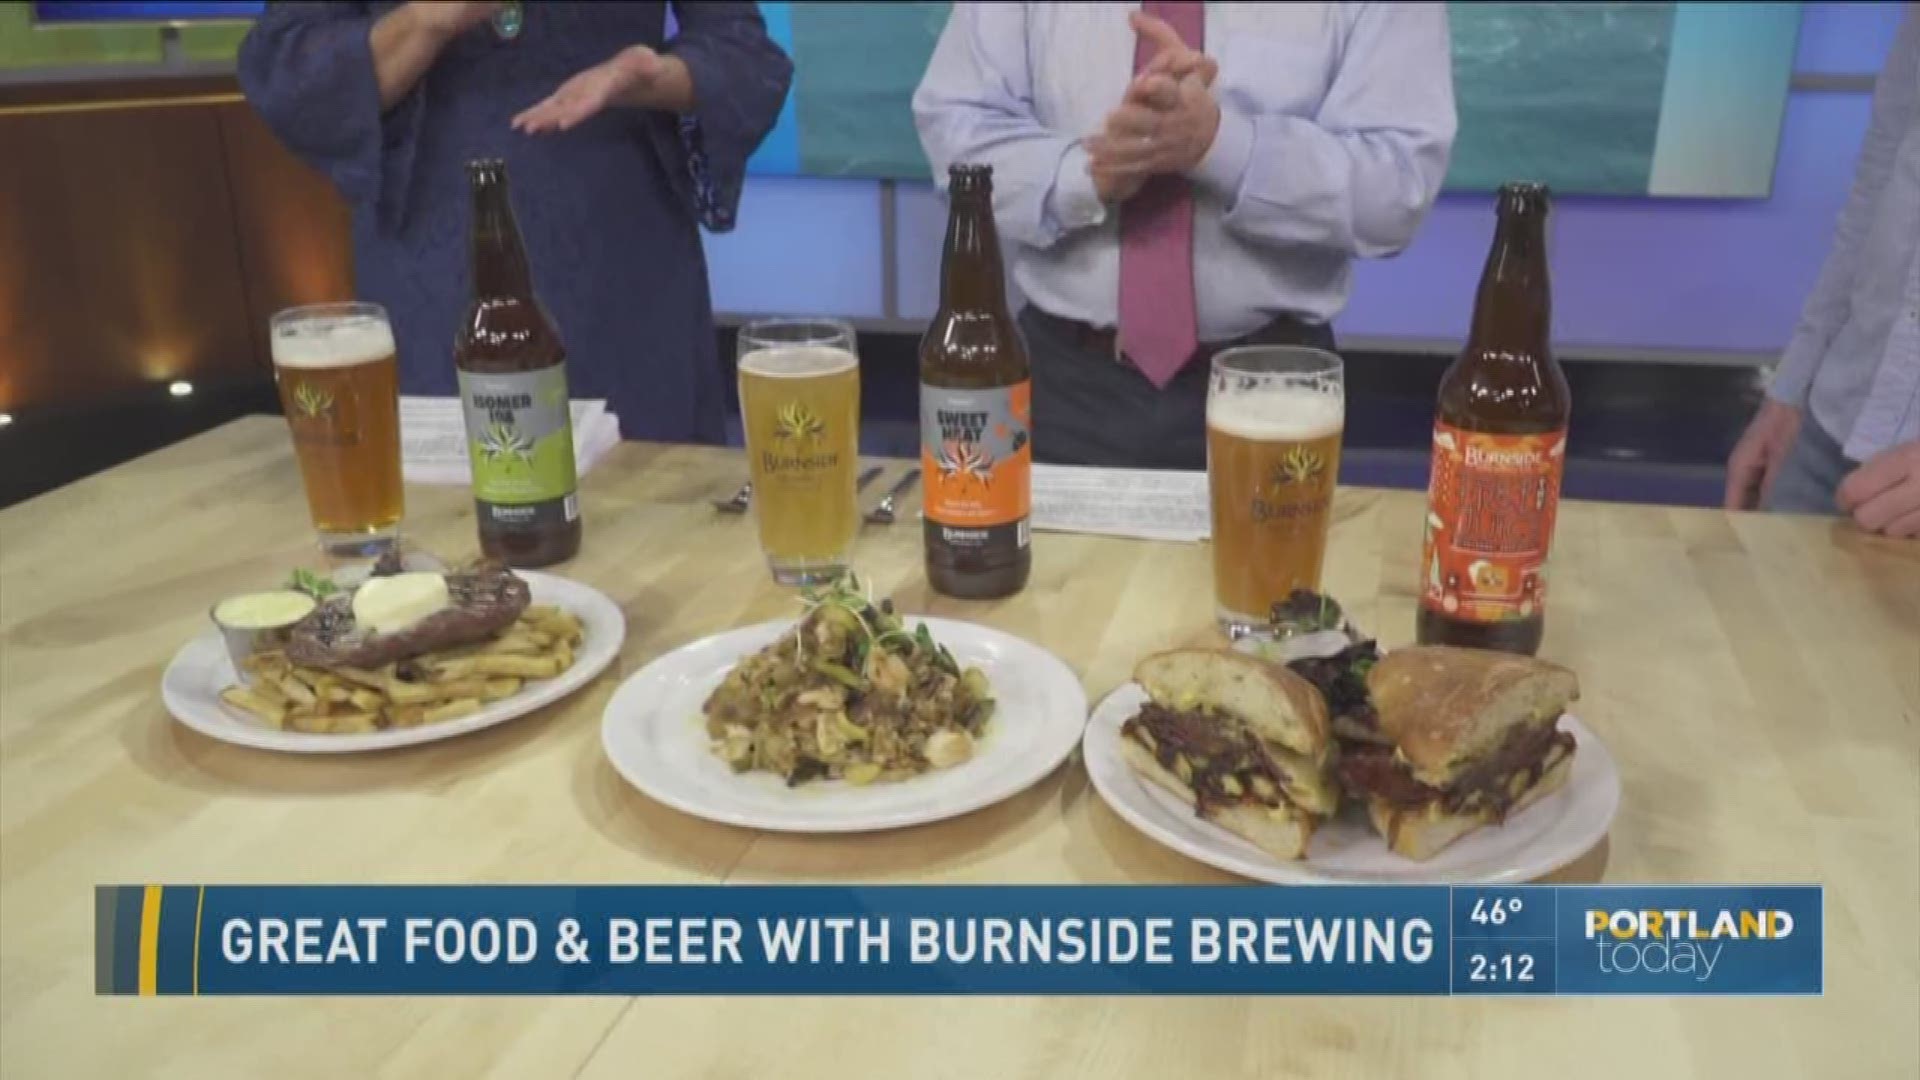 Joining us, Rick Watts, head chef at Burnside Brewing Co.